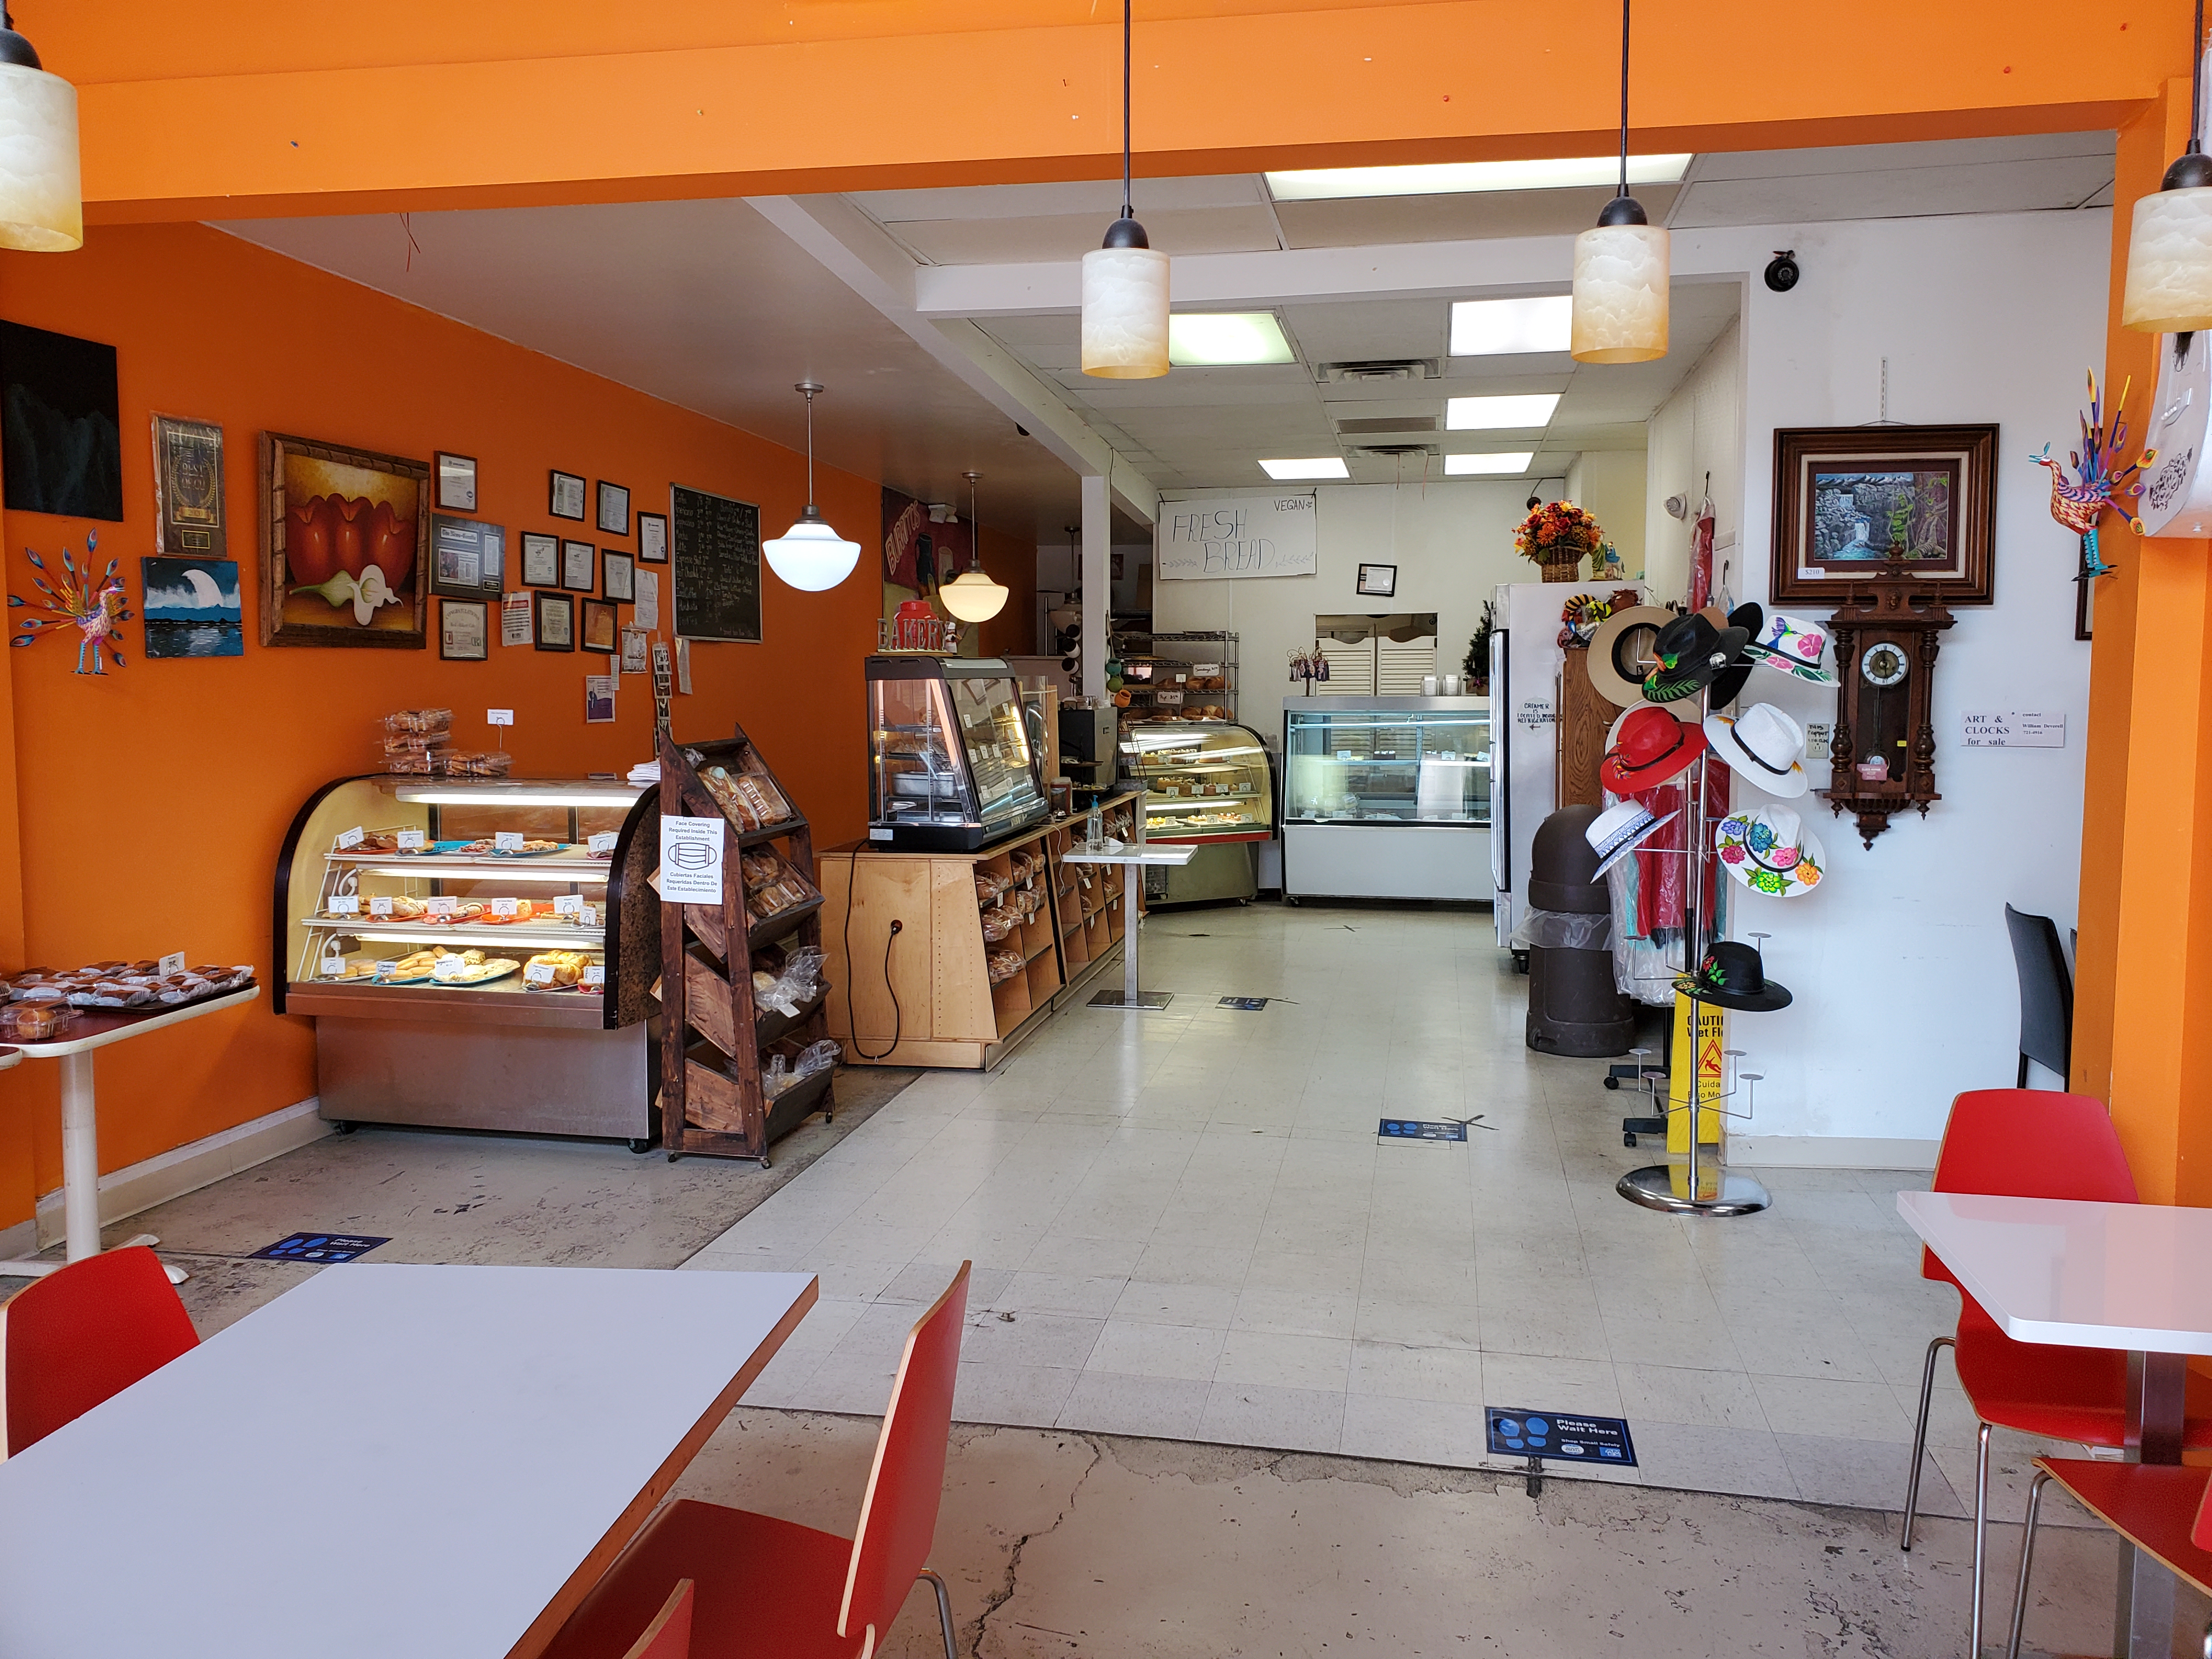 Inside Rick's Bakery, there are several cases of baked goods to the left. The walls are painted a saturated orange. Photo by Carl Busch.